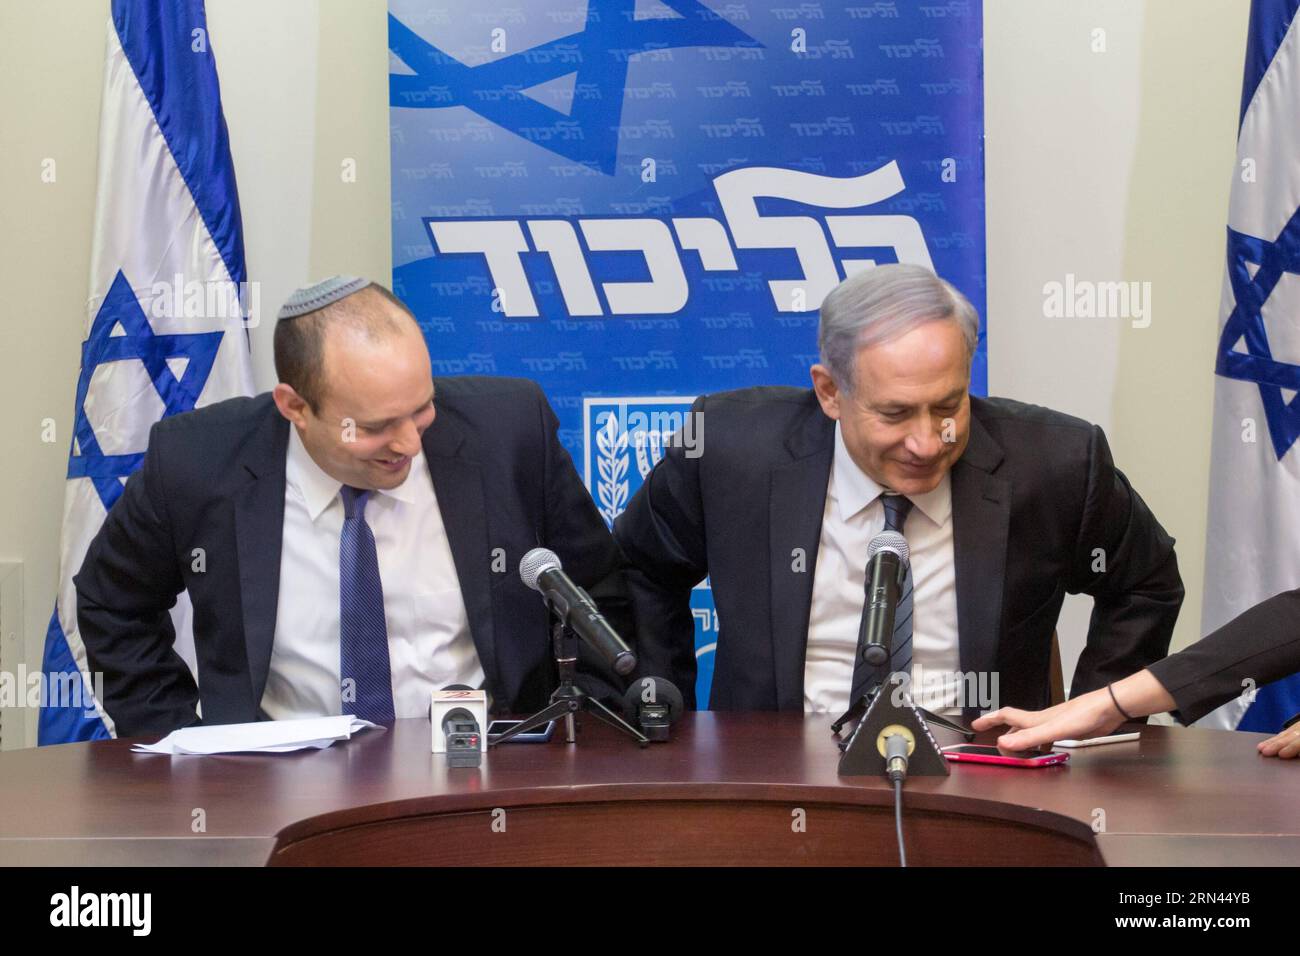 (150507) -- JERUSALEM, May 6, 2015 -- Israeli Prime Minister Benjamin Netanyahu (R) and Jewish Home party leader Naftali Bennett hold a press conference in Jerusalem May 6, 2015. Benjamin Netanyahu managed to clinch a deal with the nationalist Jewish Home party late Wednesday night, securing a new ruling coalition with a tiny majority in the 120-member parliament. ) ISRAEL-NEW COALITION-PRESS CONFERENCE JINI PUBLICATIONxNOTxINxCHN   Jerusalem May 6 2015 Israeli Prime Ministers Benjamin Netanyahu r and Jewish Home Party Leader Naftali Bennett Hold a Press Conference in Jerusalem May 6 2015 Benj Stock Photo